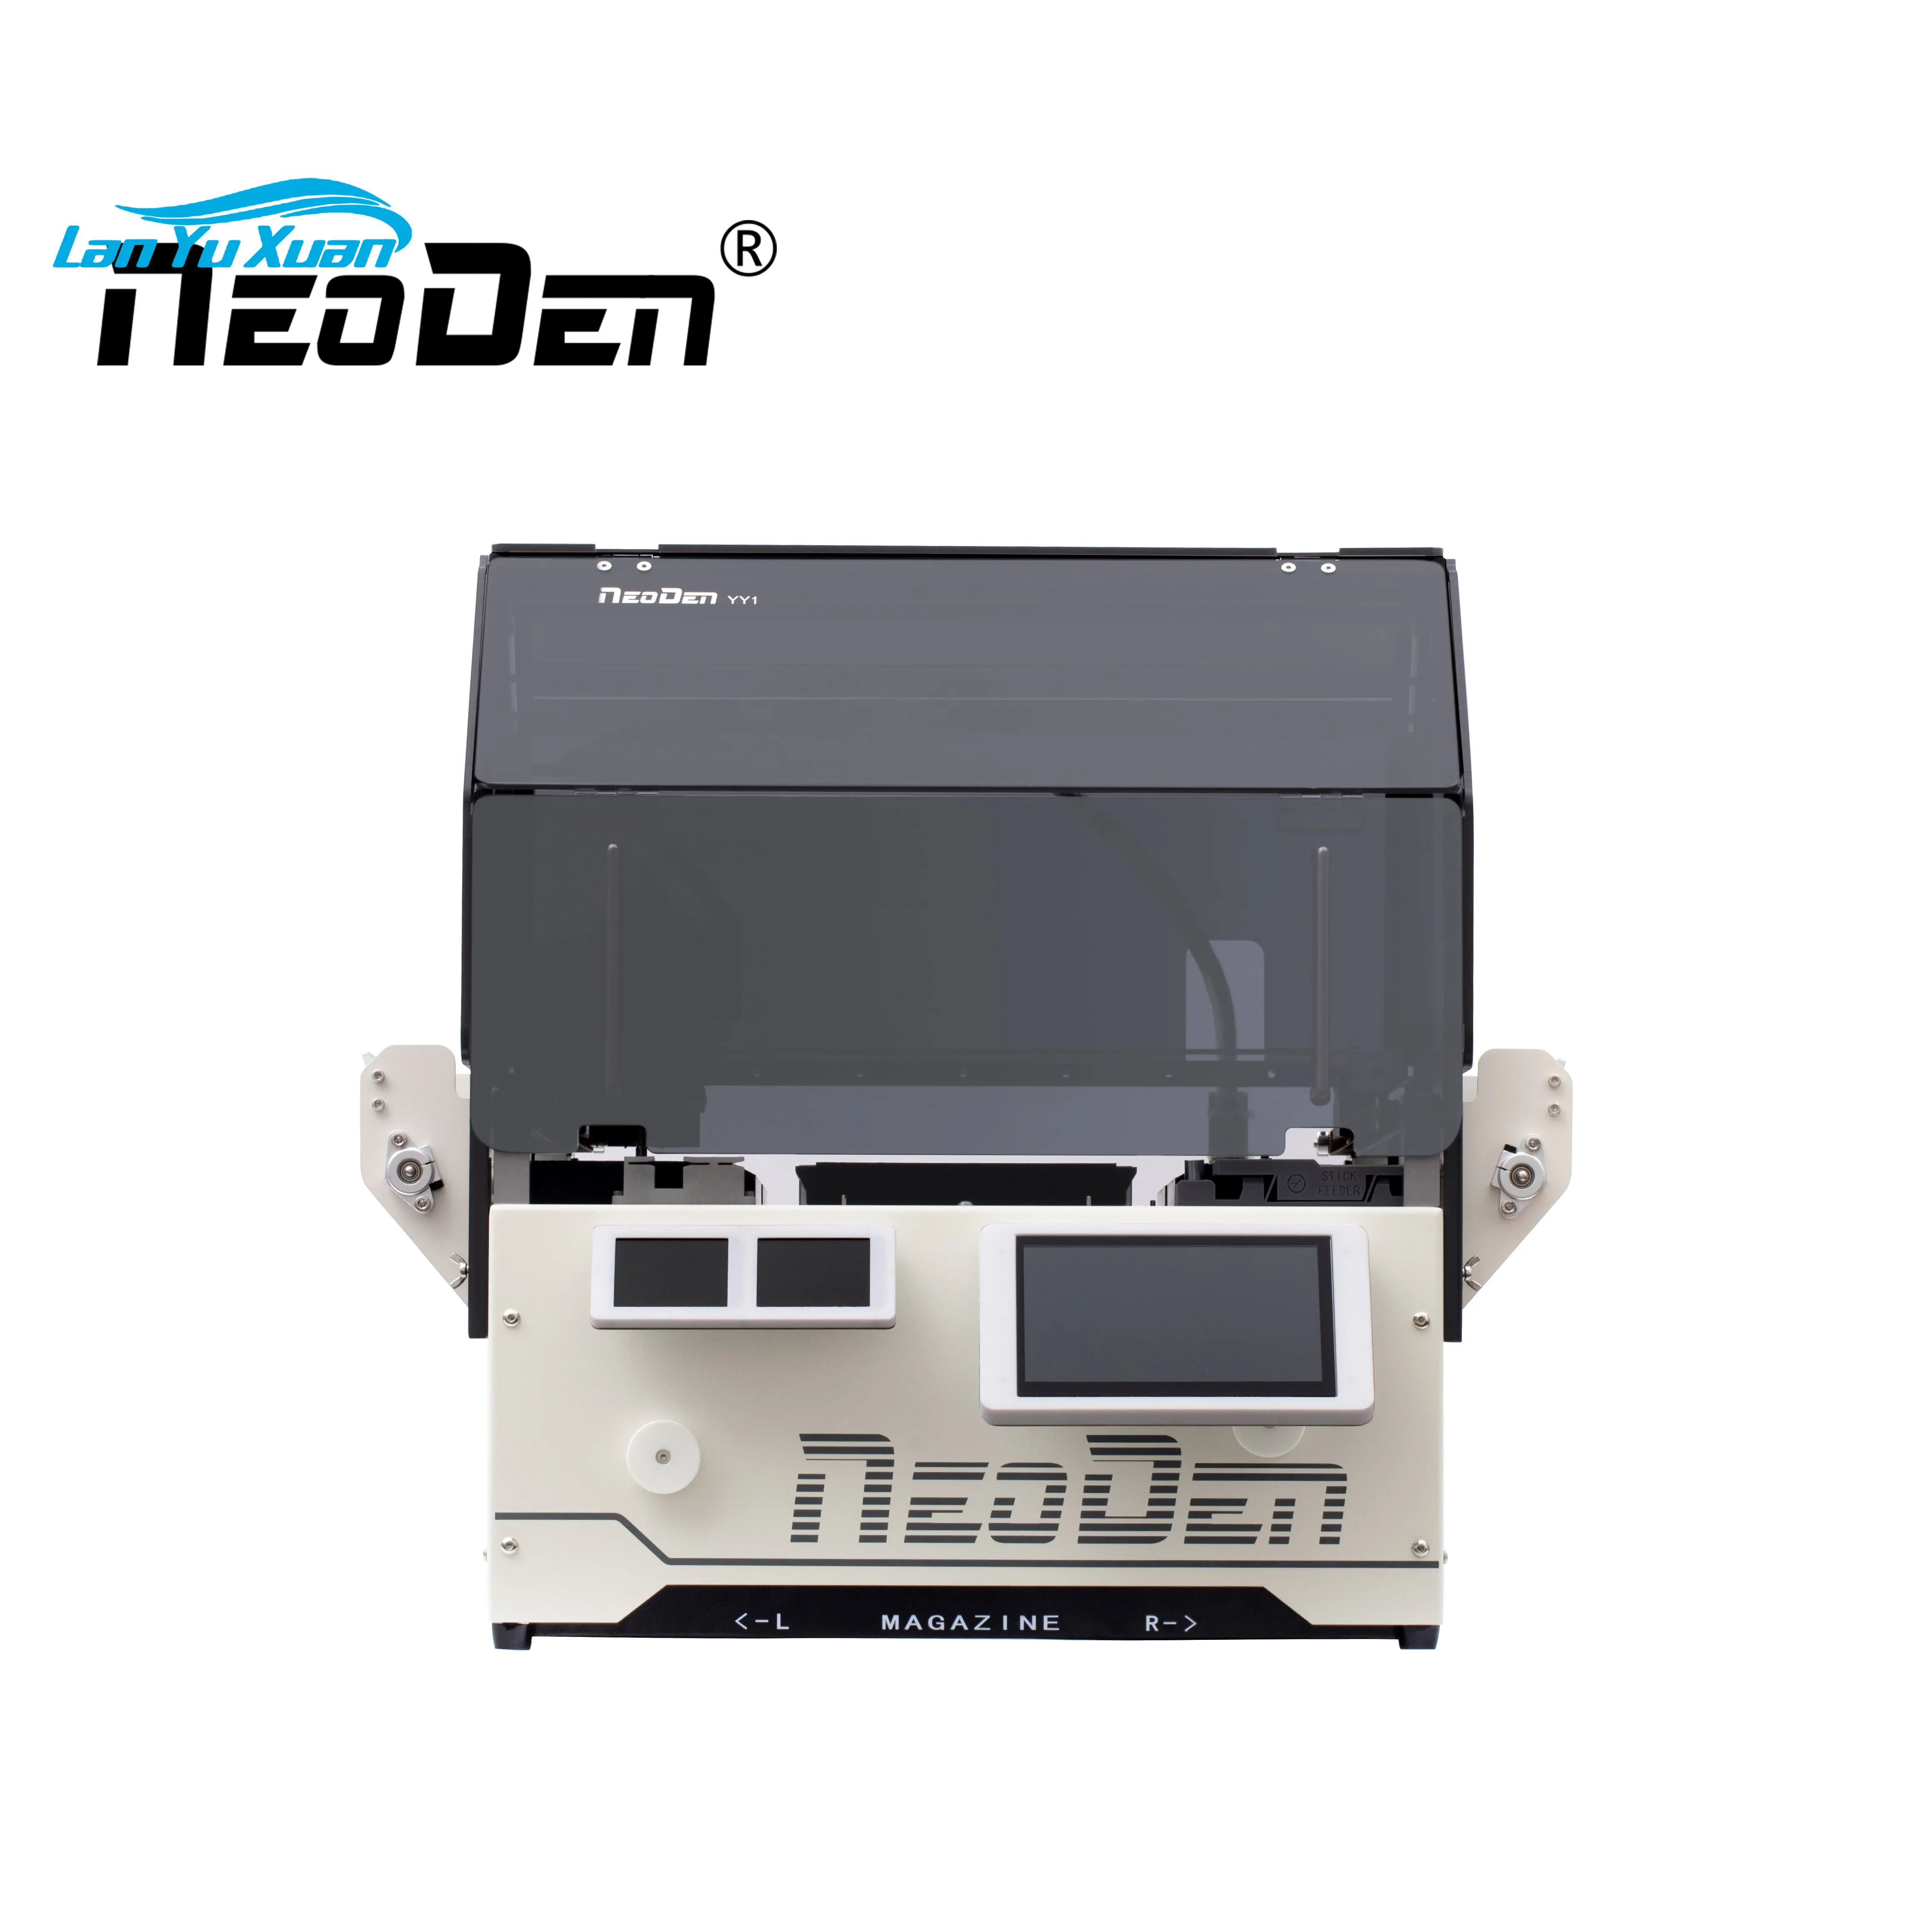 

Neoden YY1 Lage Kosten Pick En Place Machine Smd Chip Mounter Smt Pick And Place Robot Voor 0201, 0402, 0603, 0805 Etc